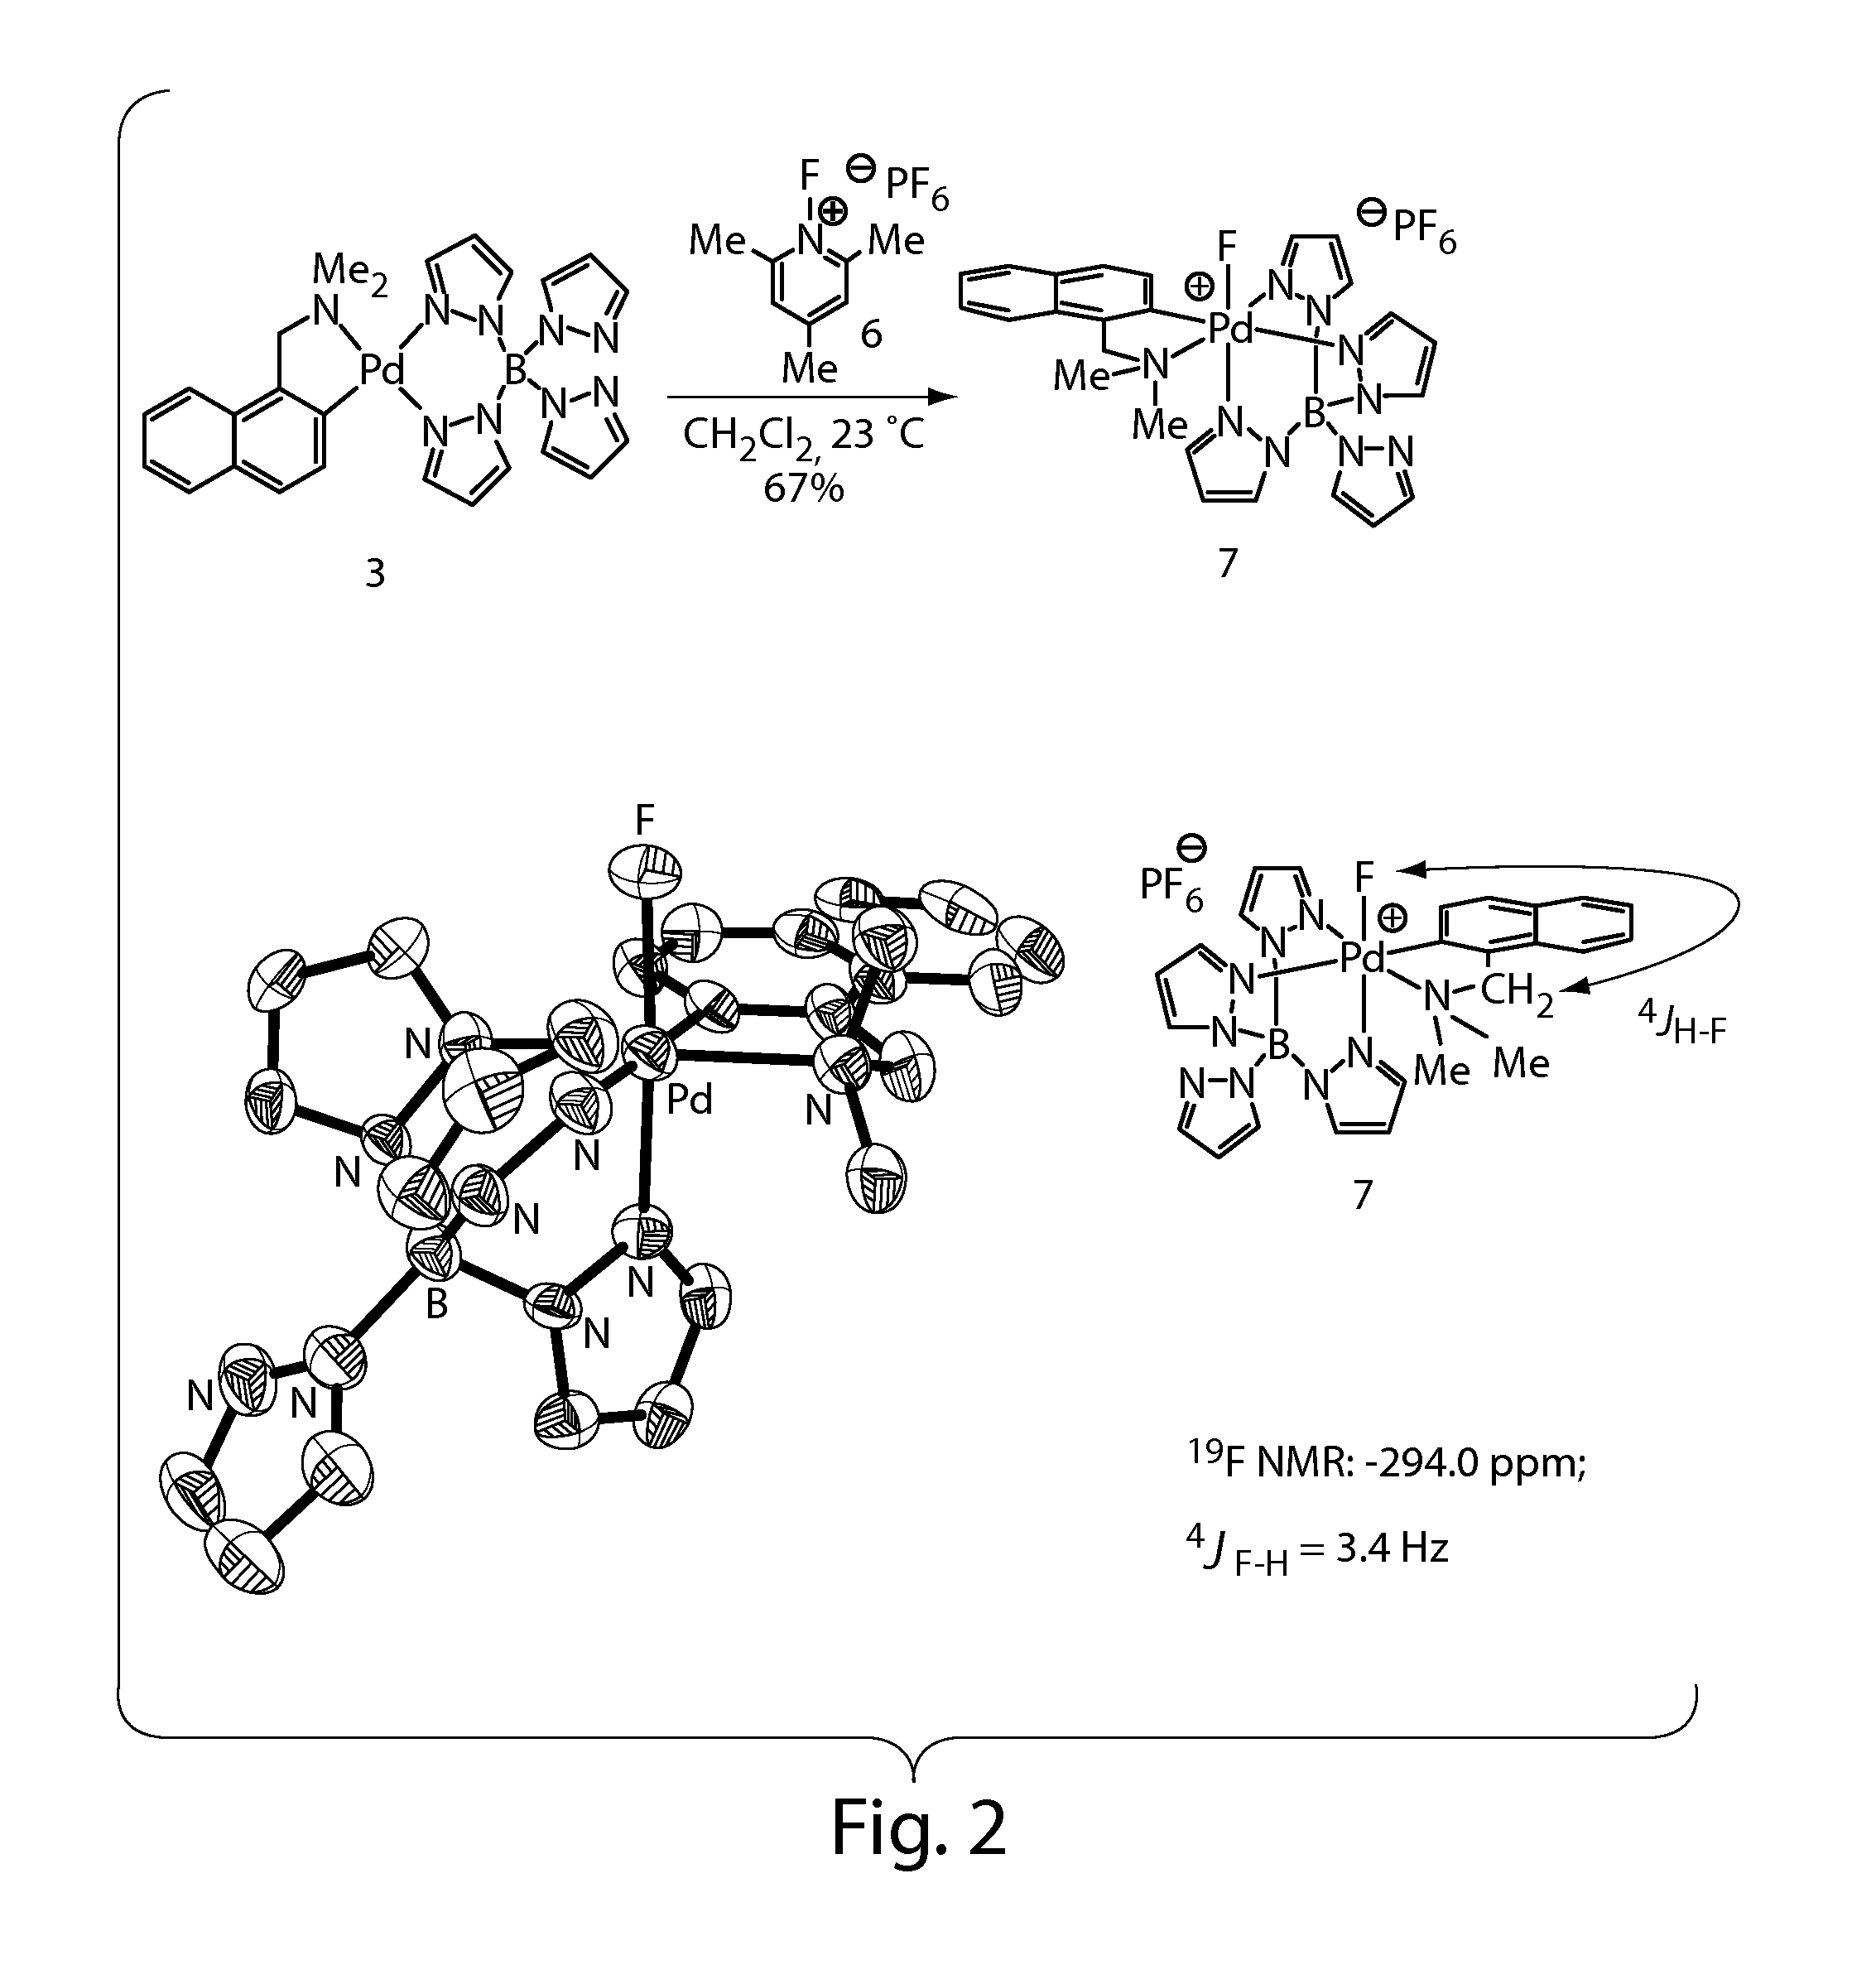 High-valent palladium fluoride complexes and uses thereof